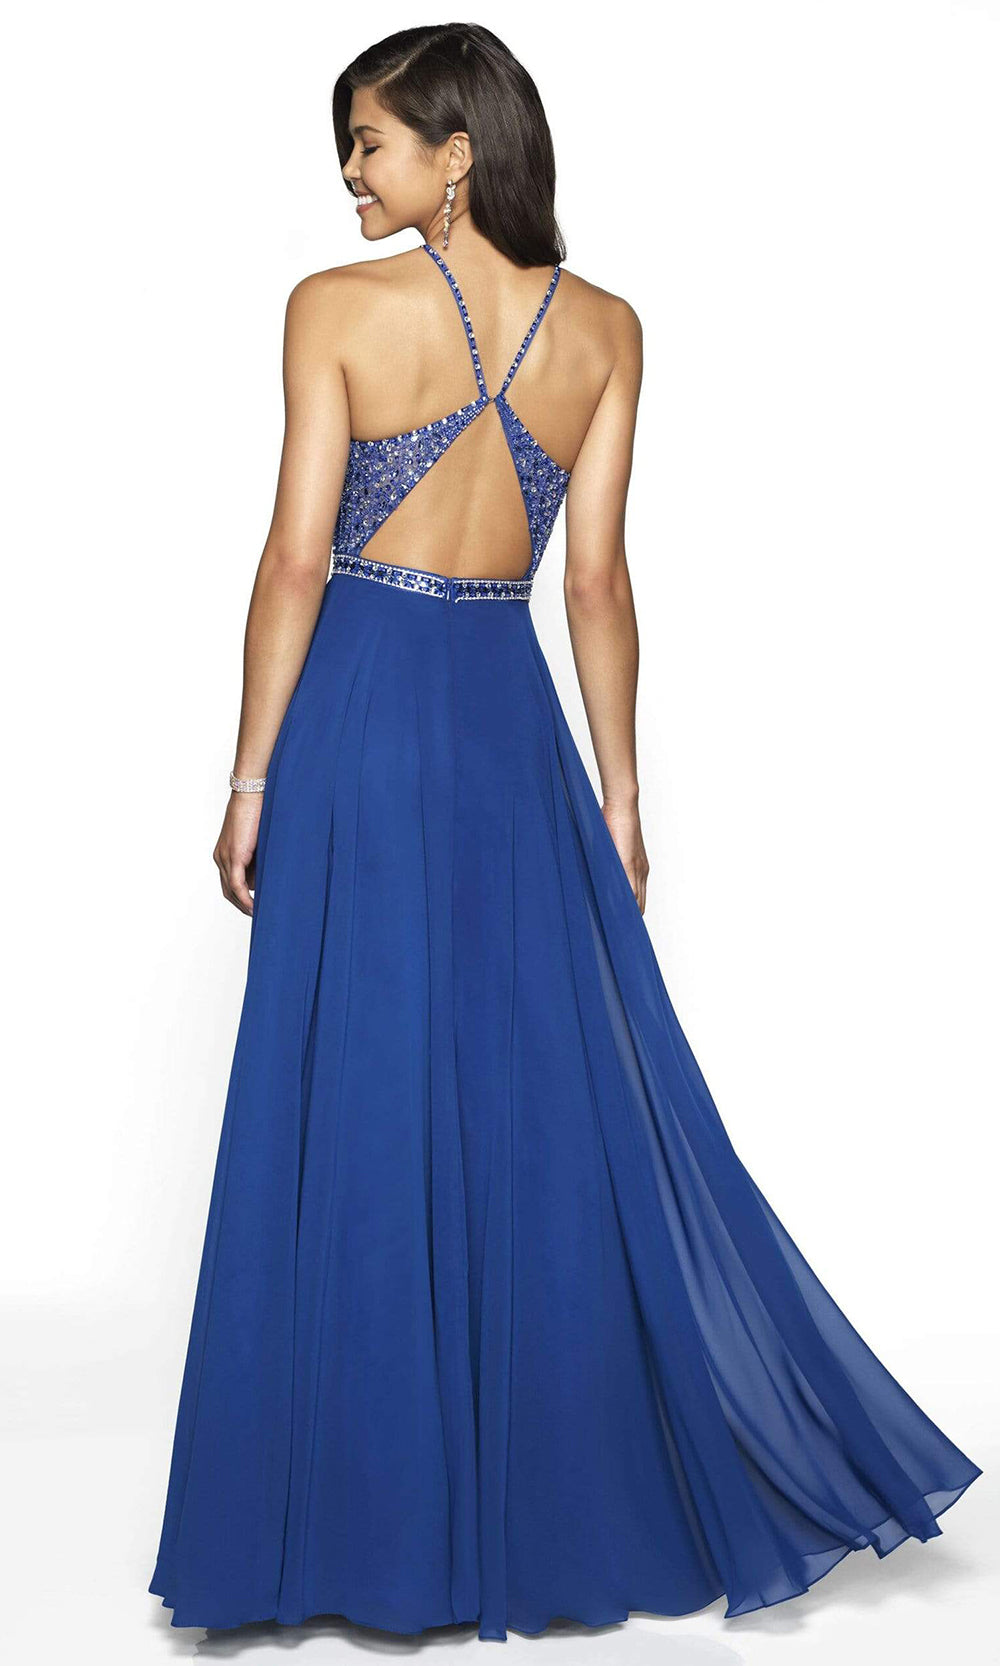 Blush by Alexia Designs - 11720 Beaded Embellished Halter Tulle Gown - 1 pc Royal In Size 4 Available CCSALE 4 / Royal